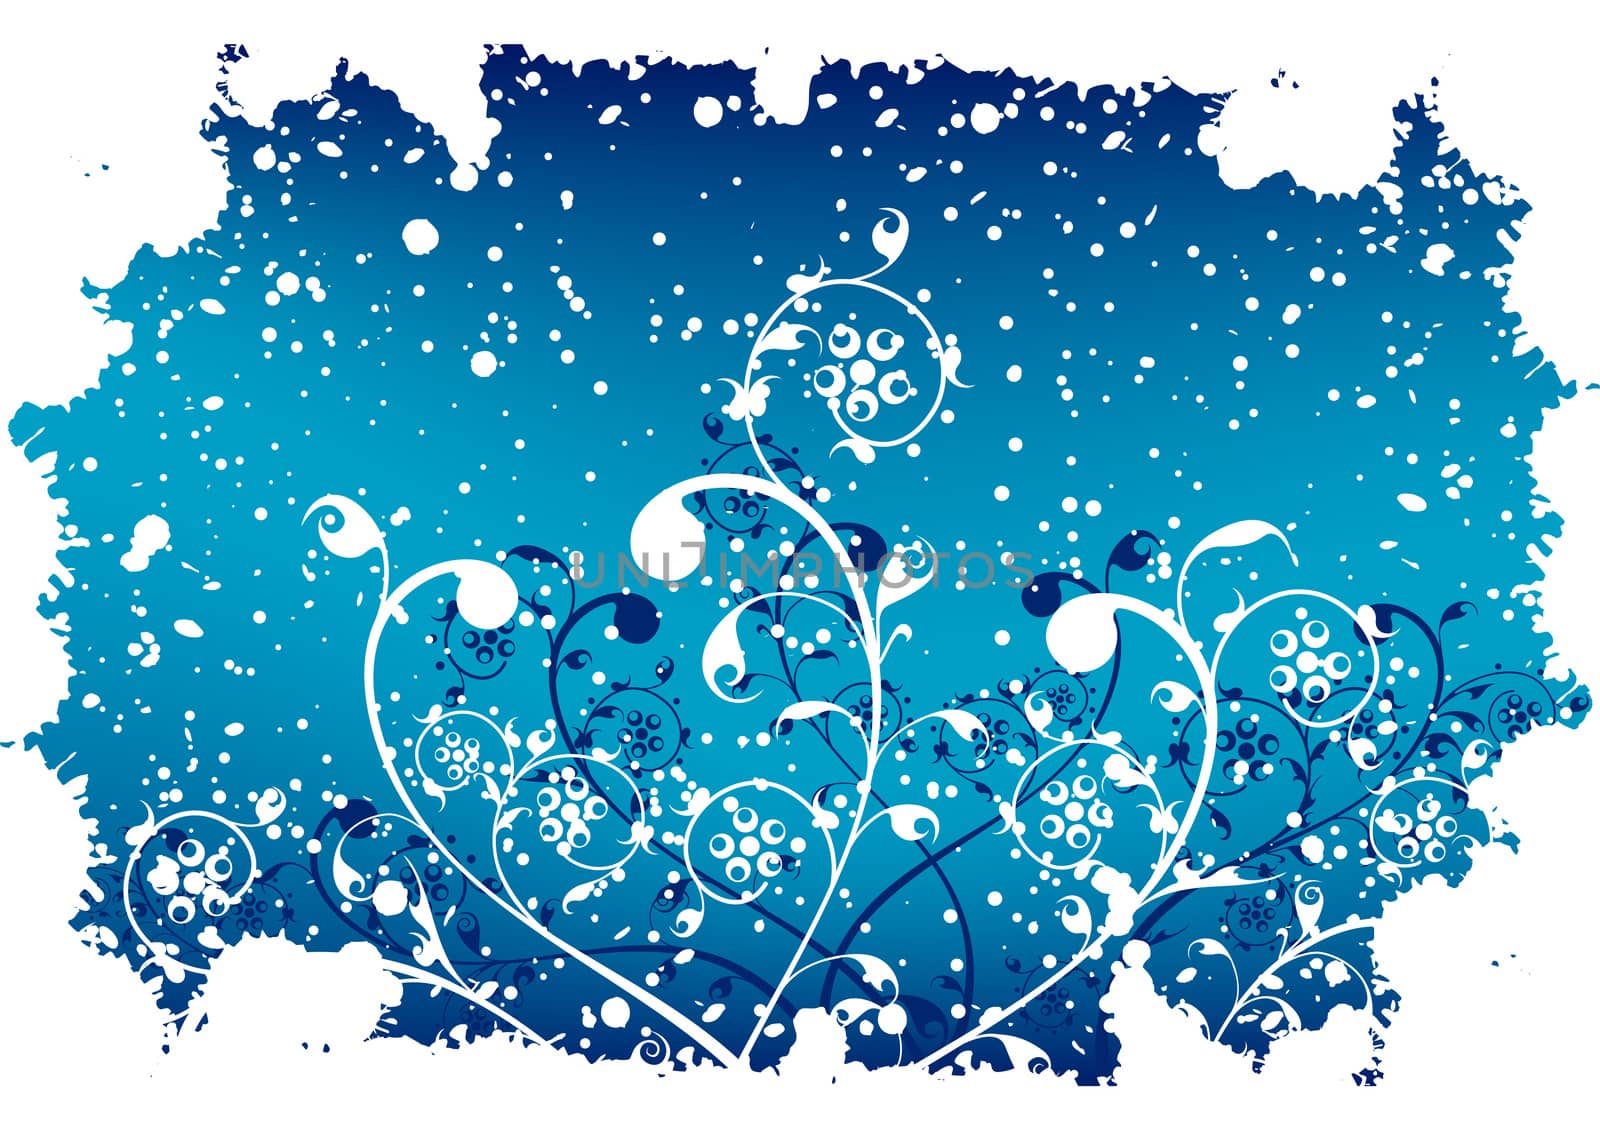 Abstract grunge winter background with flakes and flowers in blu by WaD